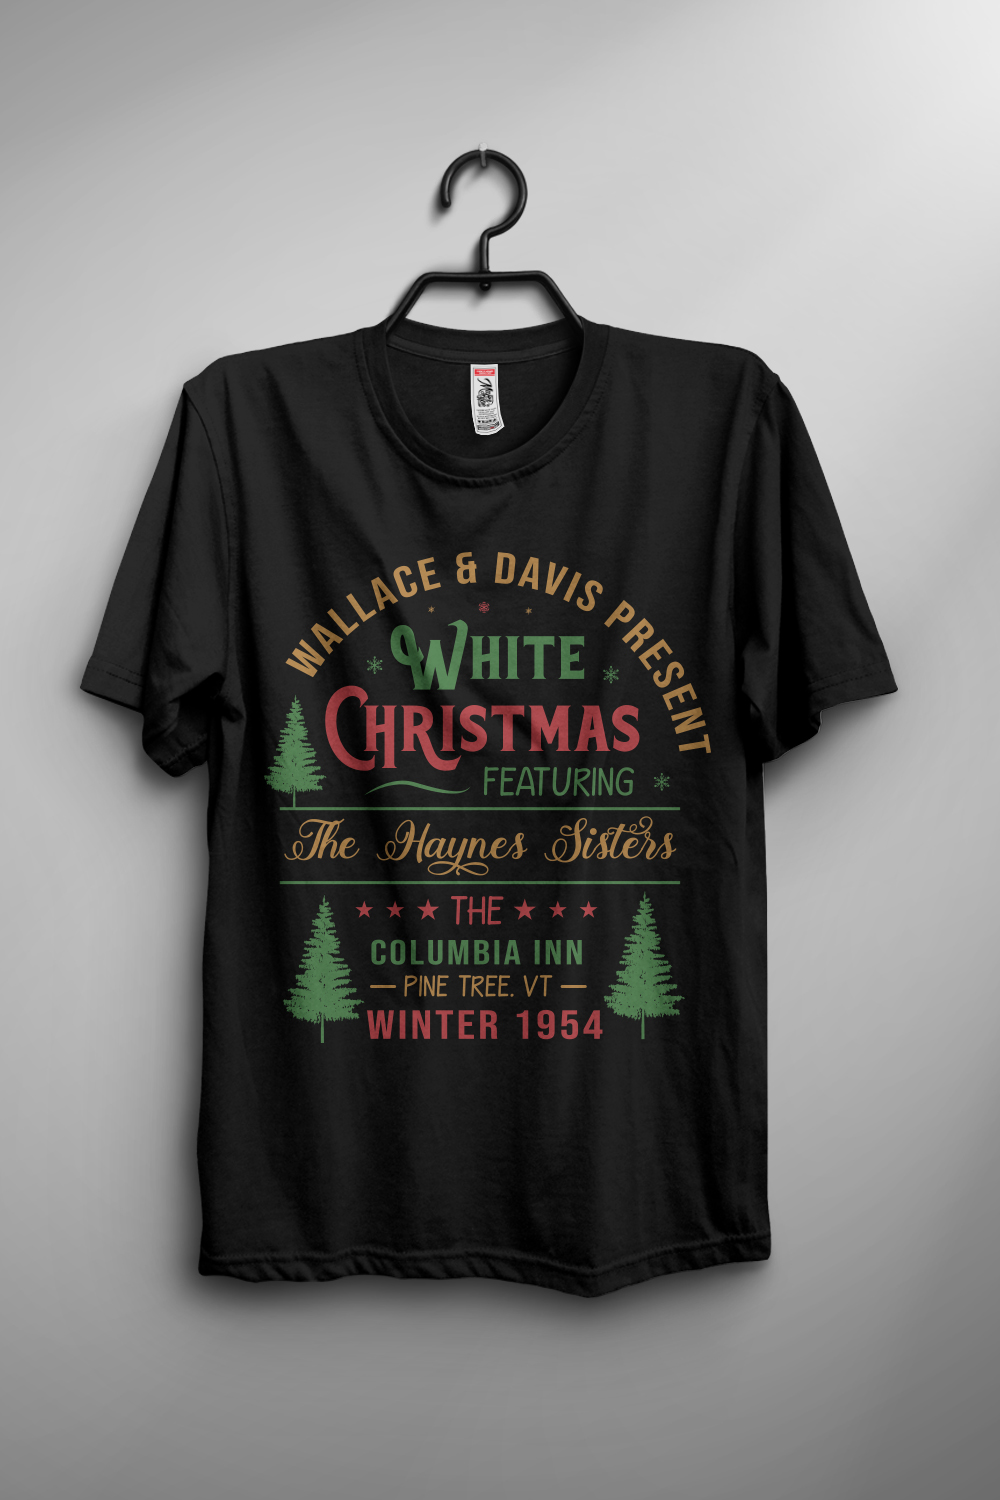 wallace & davis present white christmas featuring the haynes sisters the columbia inn pine tree vt winter 1954 T-shirt design pinterest preview image.